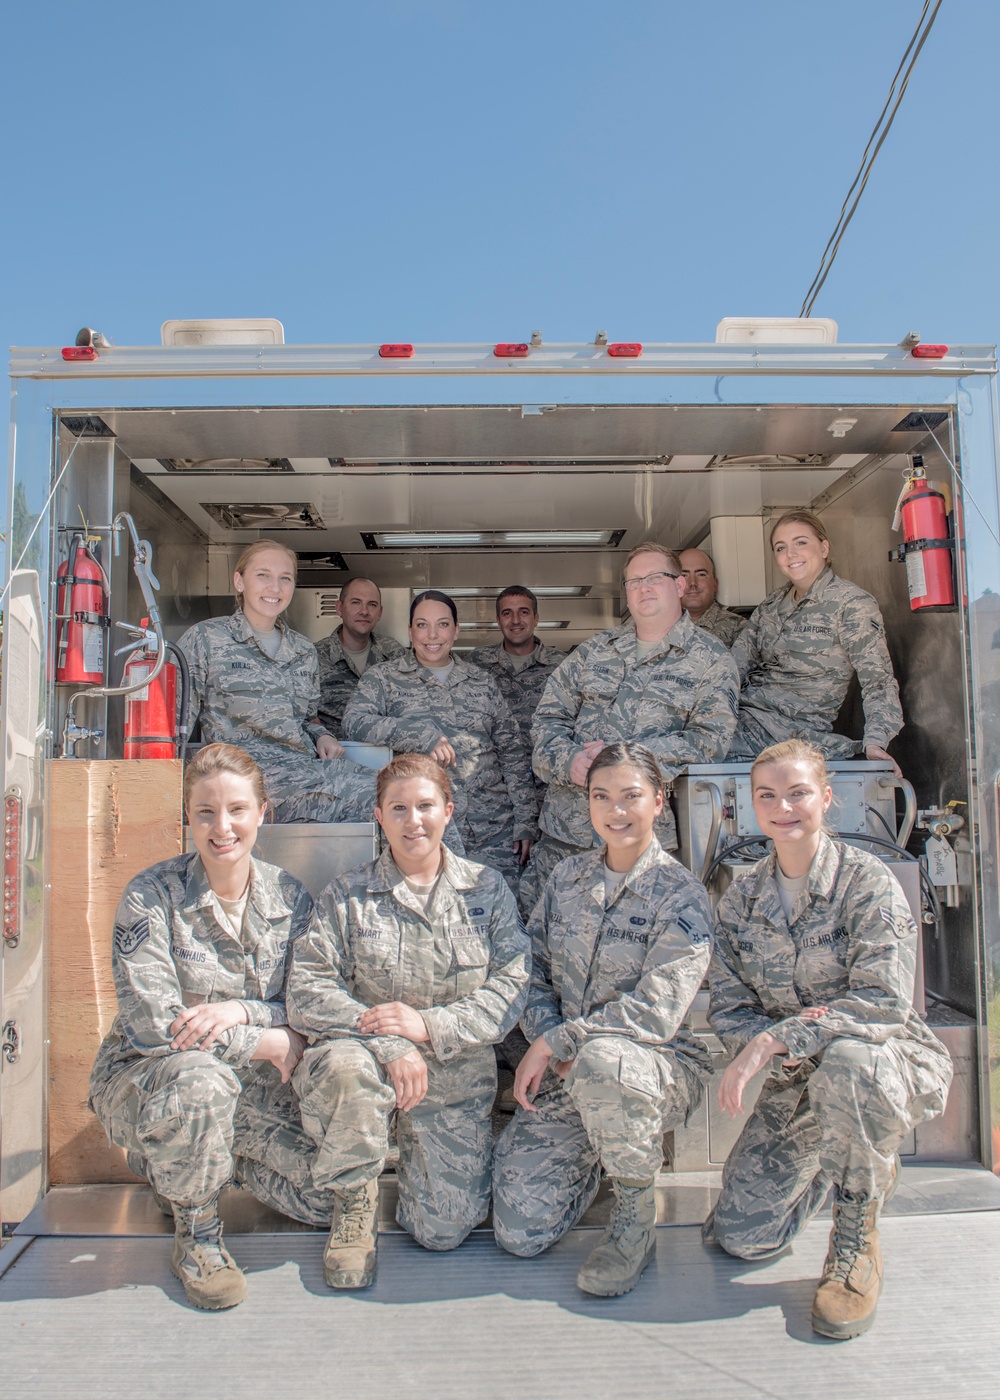 Members of the 148FW and 133AW deployed to Puerto Rico in support of hurricane relief efforts